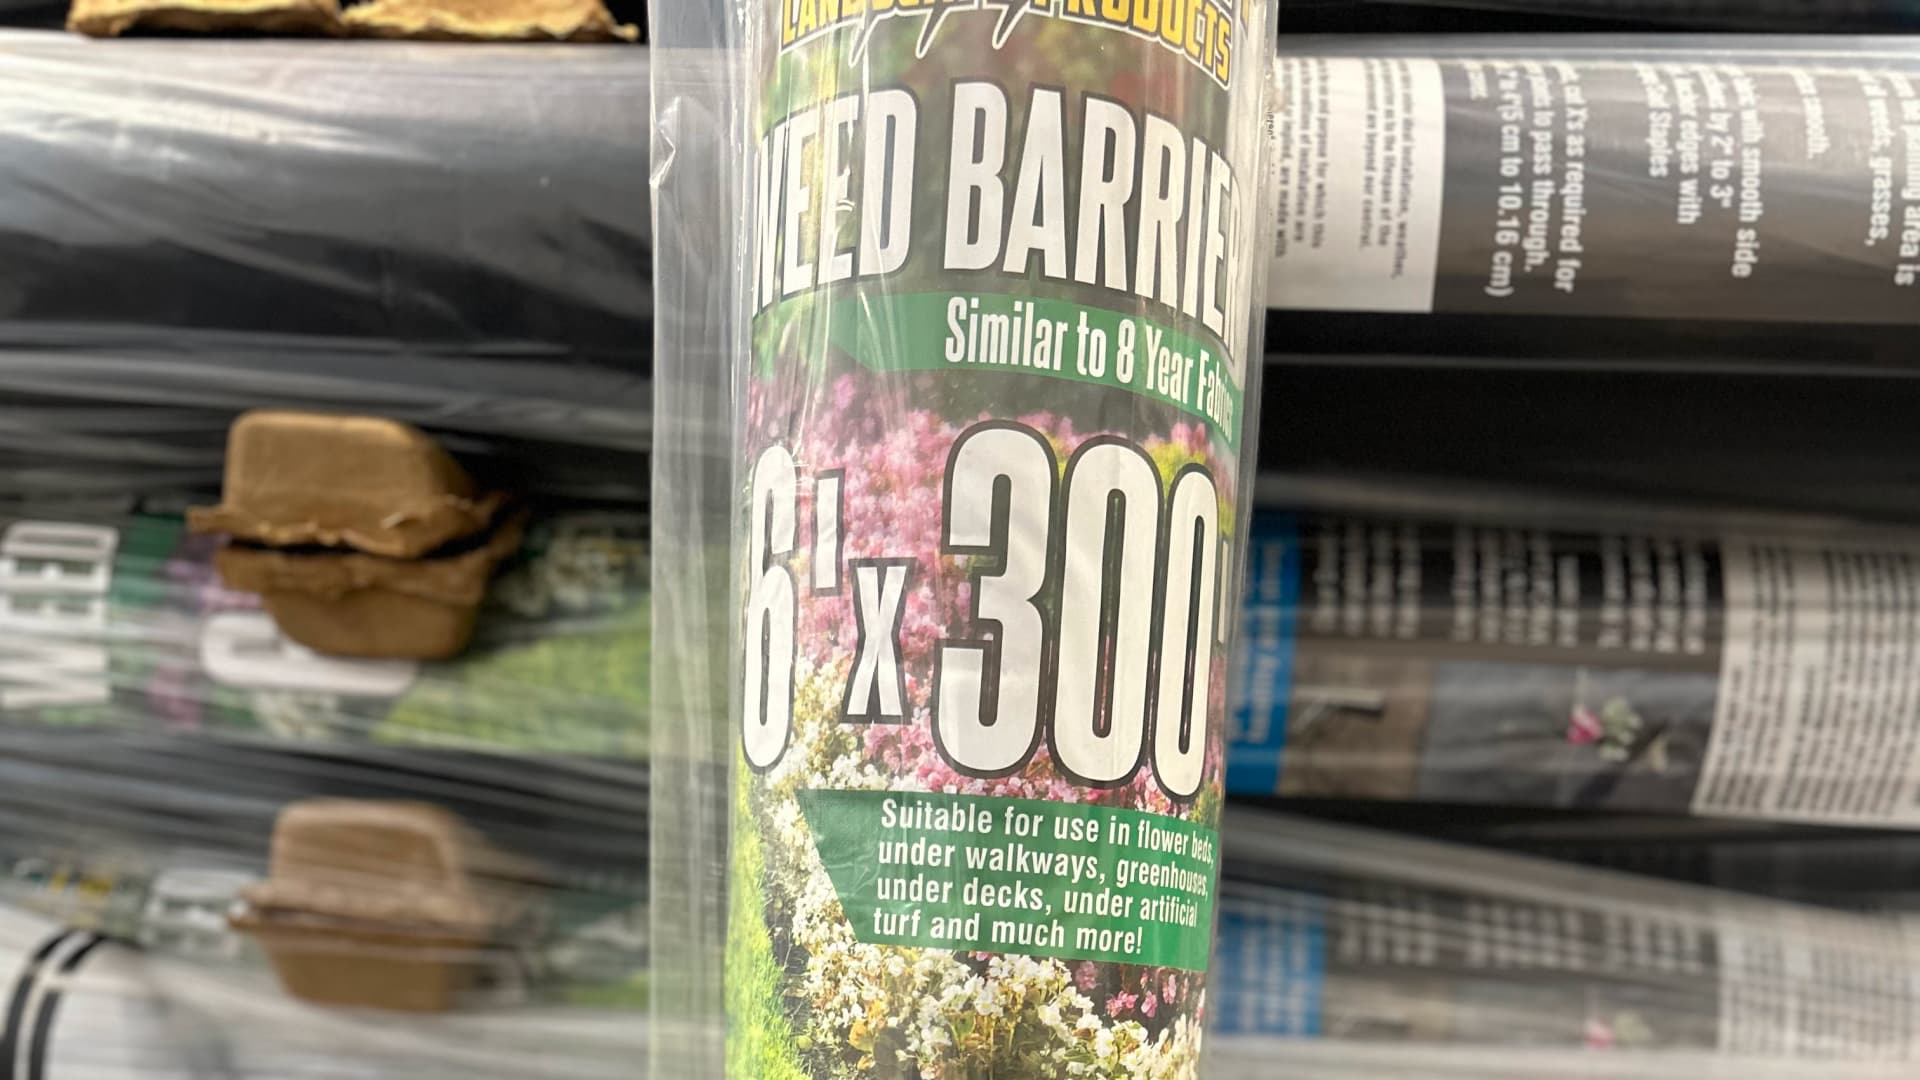 Weed Barrier container